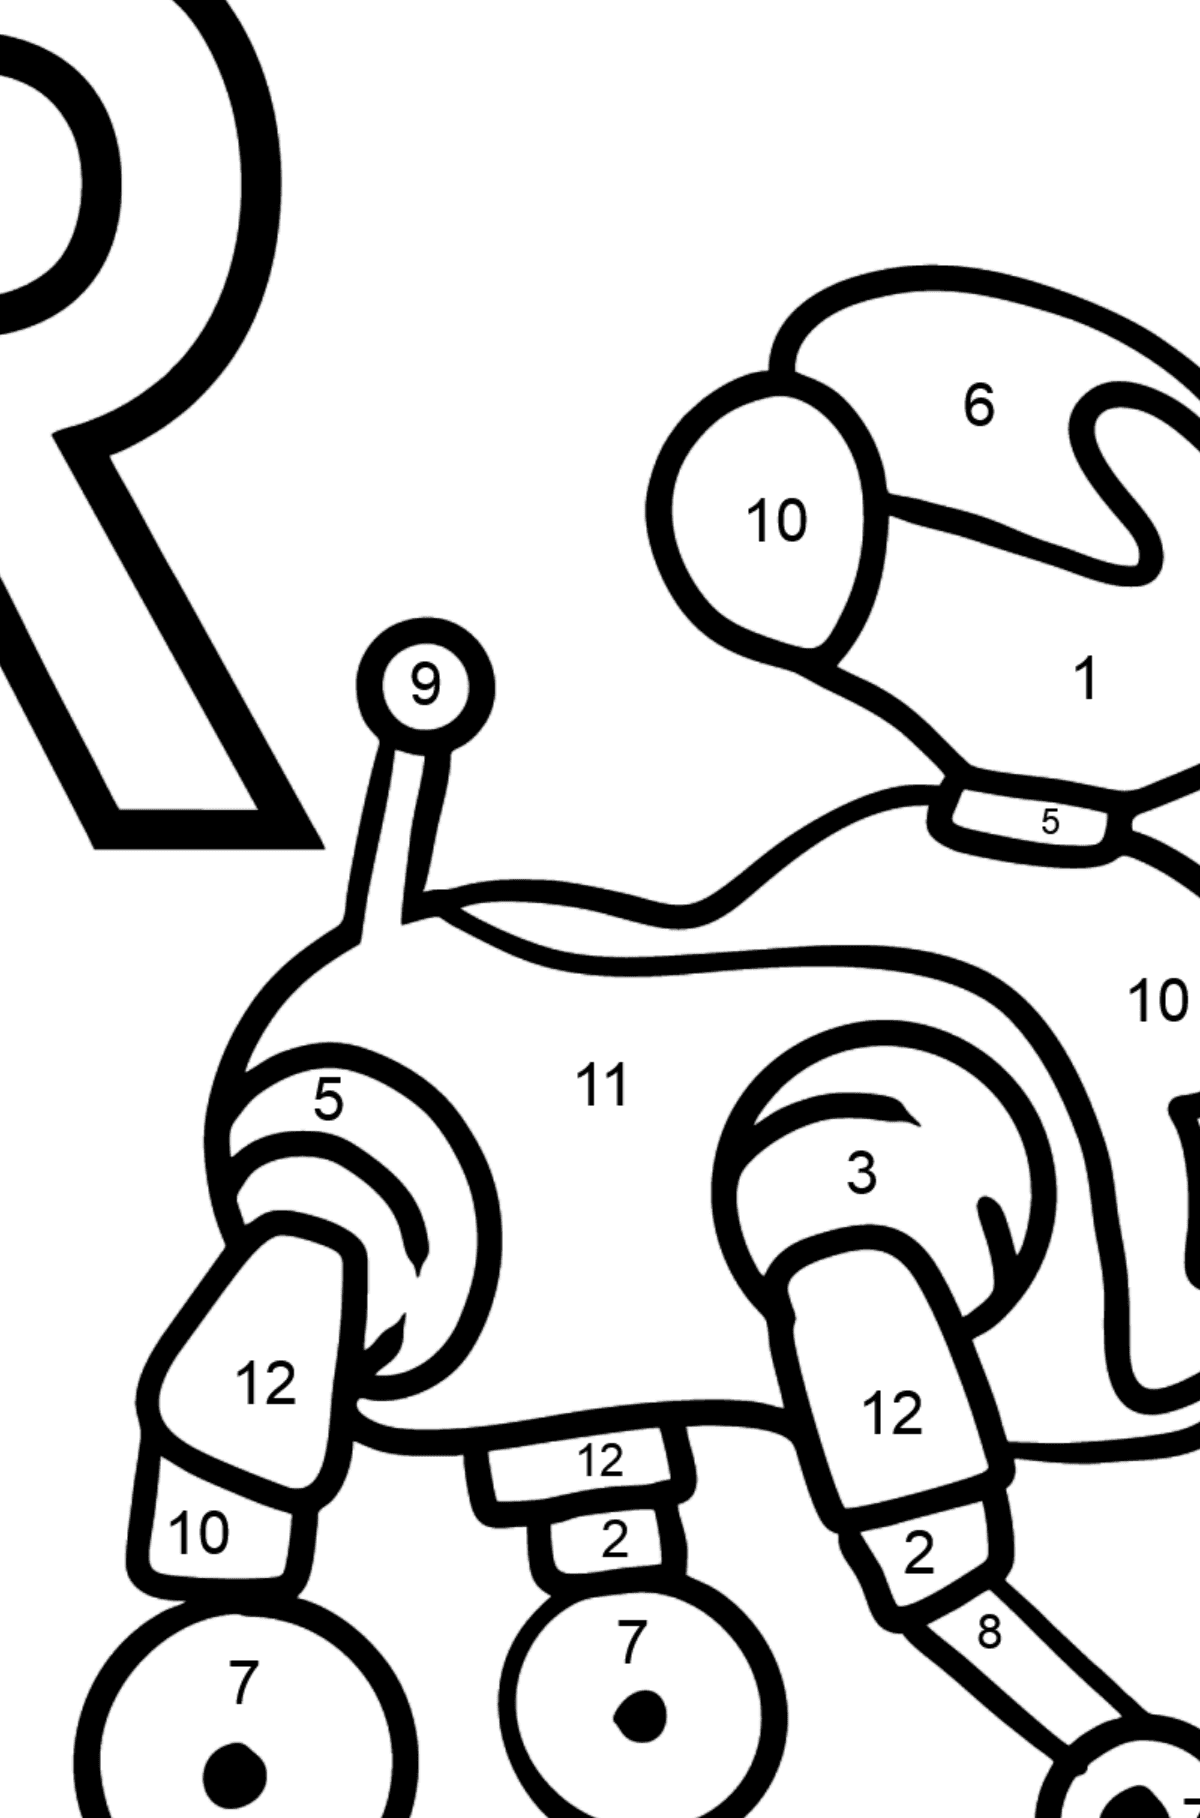 Spanish Letter R coloring pages - ROBOT - Coloring by Numbers for Kids